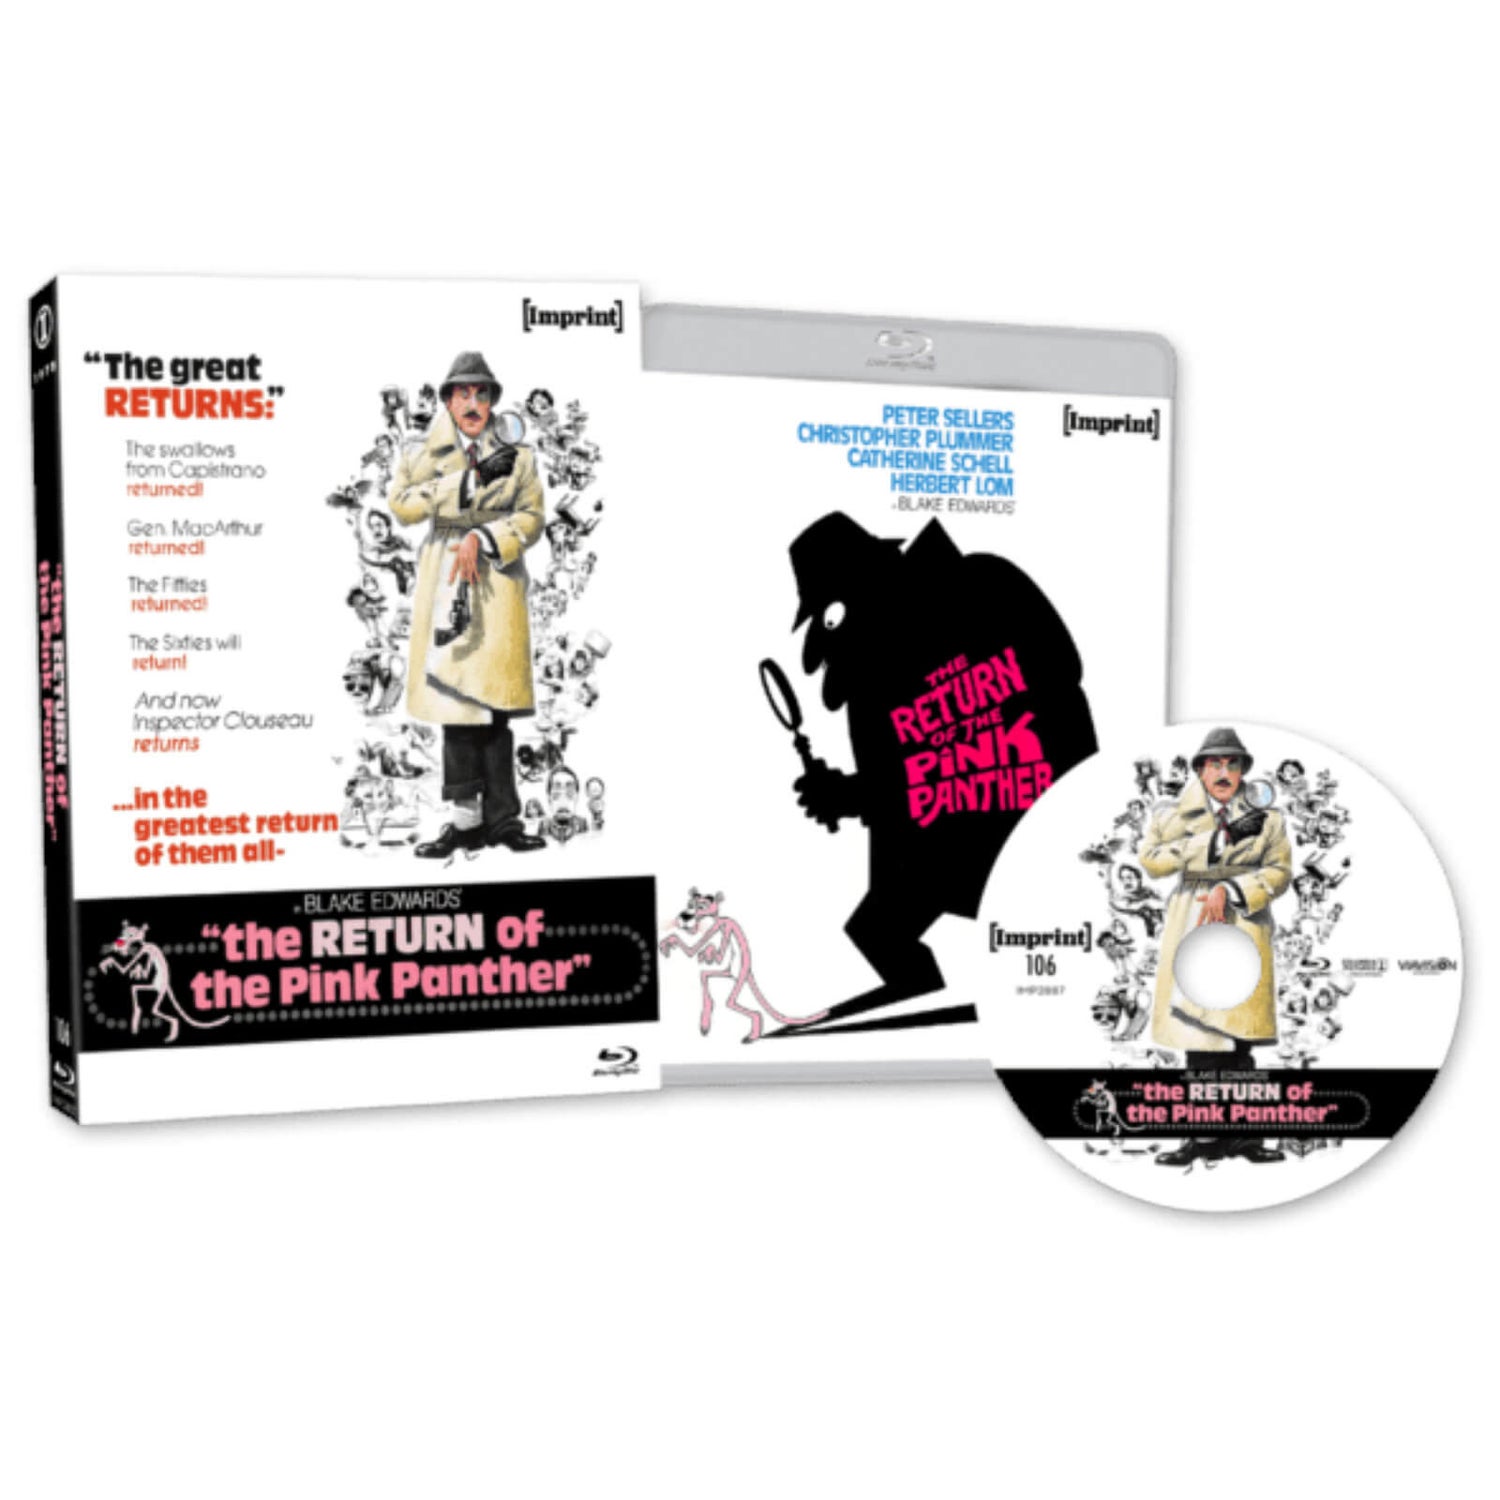 The Return of the Pink Panther - Imprint Collection